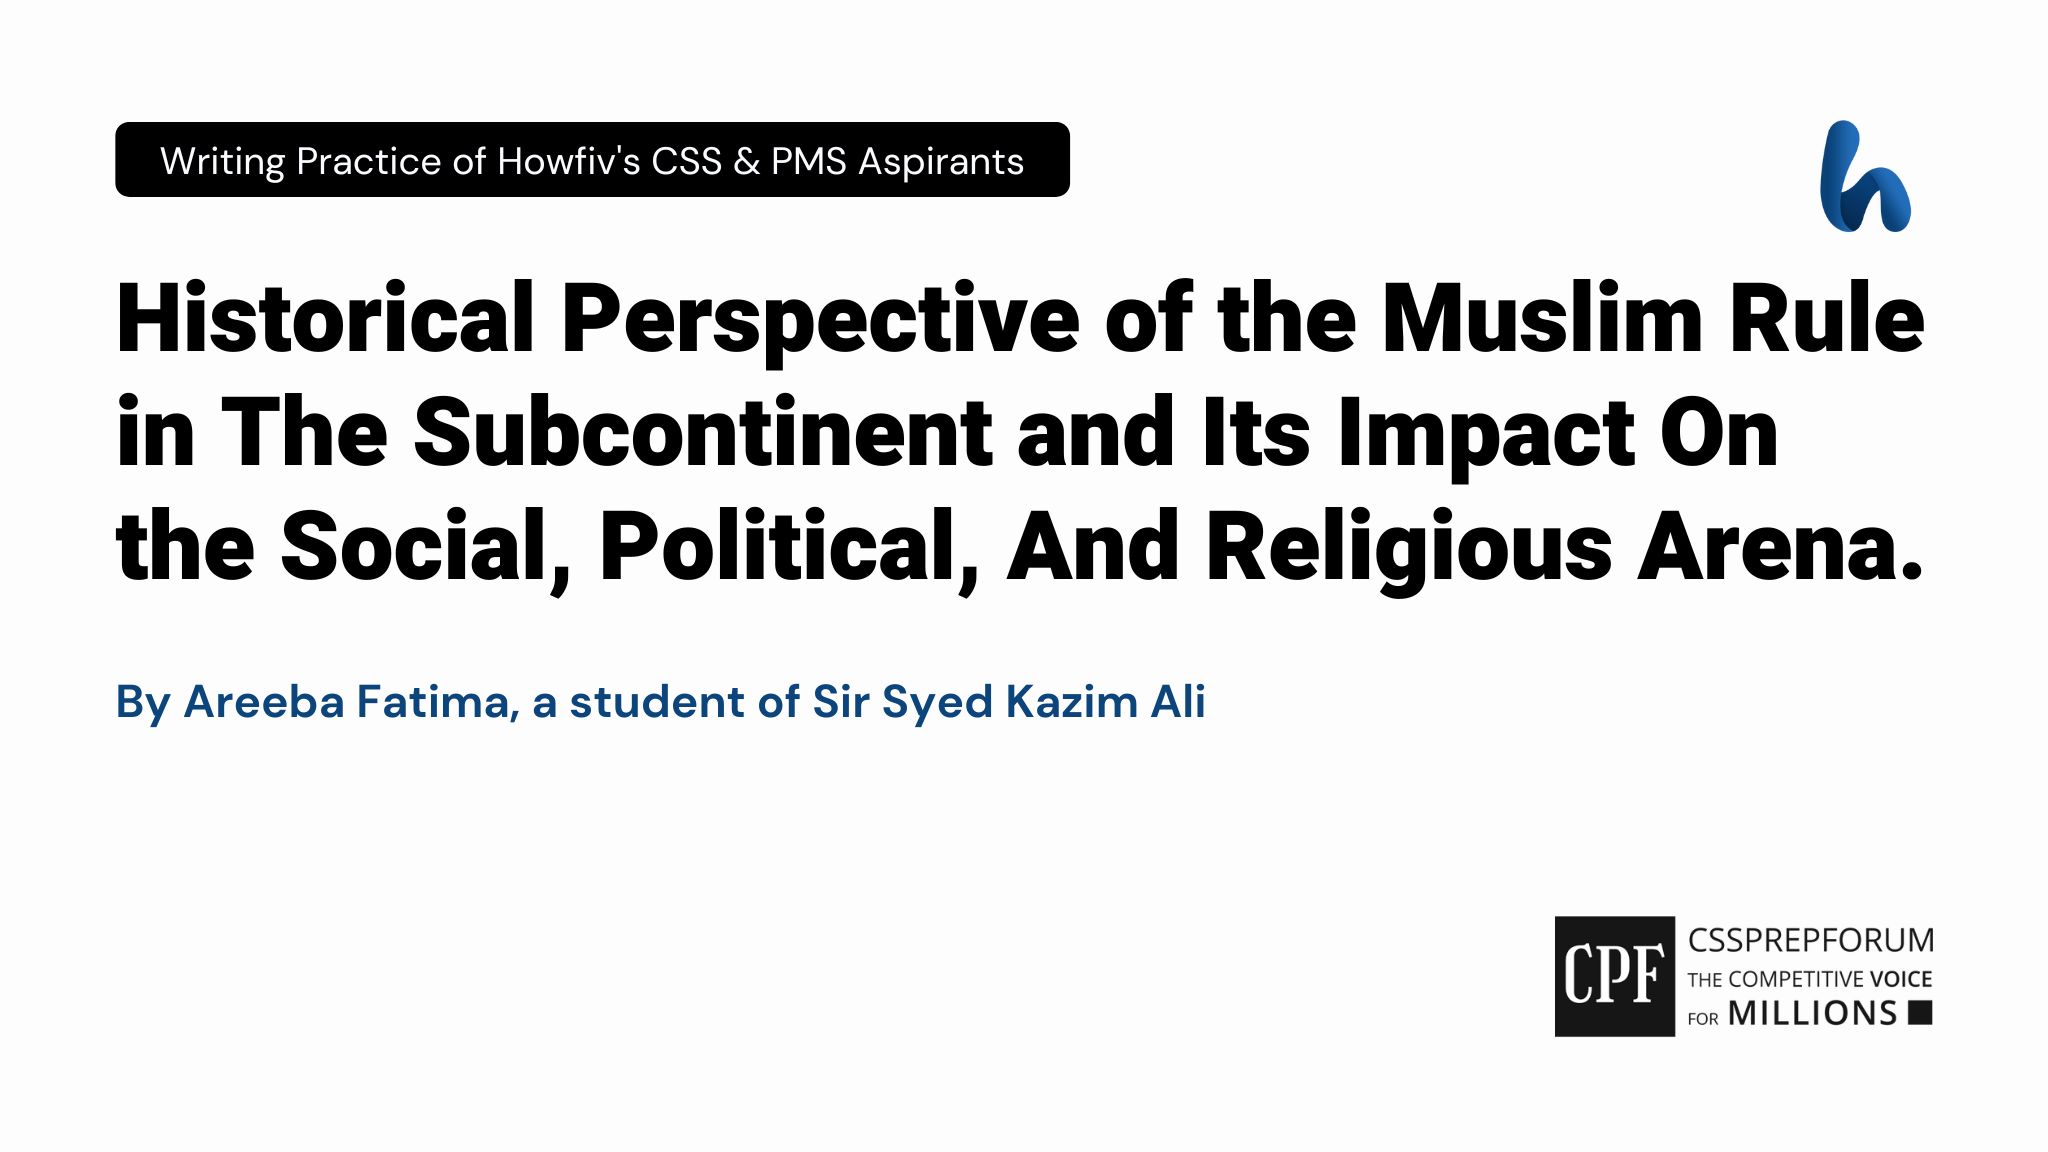 Historical Perspective of the Muslim Rule in The Subcontinent and Its Impact On the Social, Political, And Religious Arena